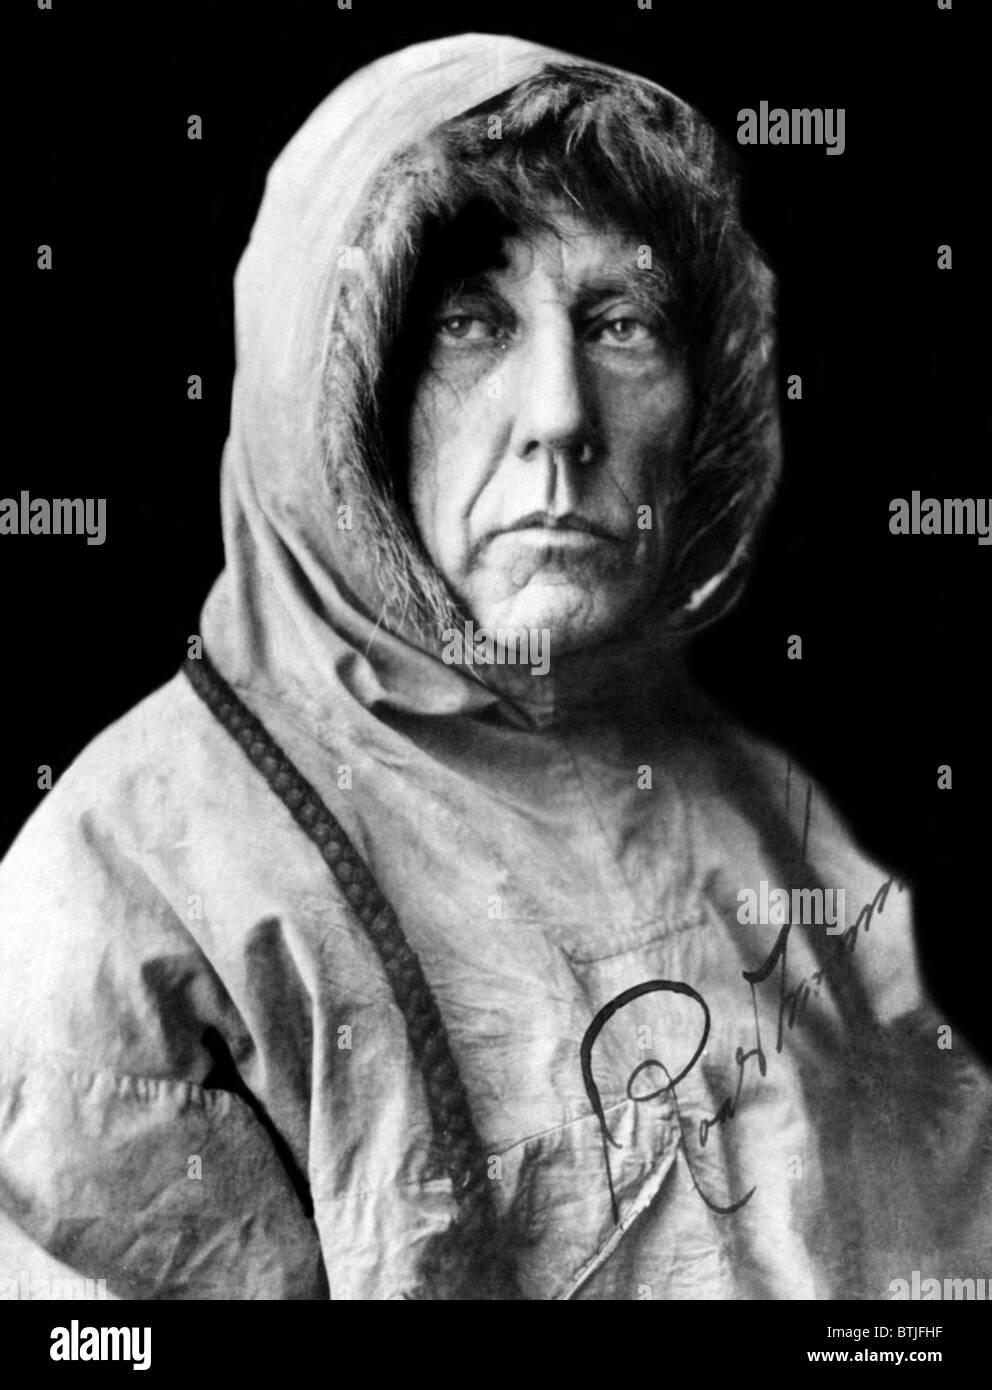 Roald Amundsen, the first person to reach the South Pole. The Norwegian explorer made it there in 1911. Photo taken in 1925. Cou Stock Photo